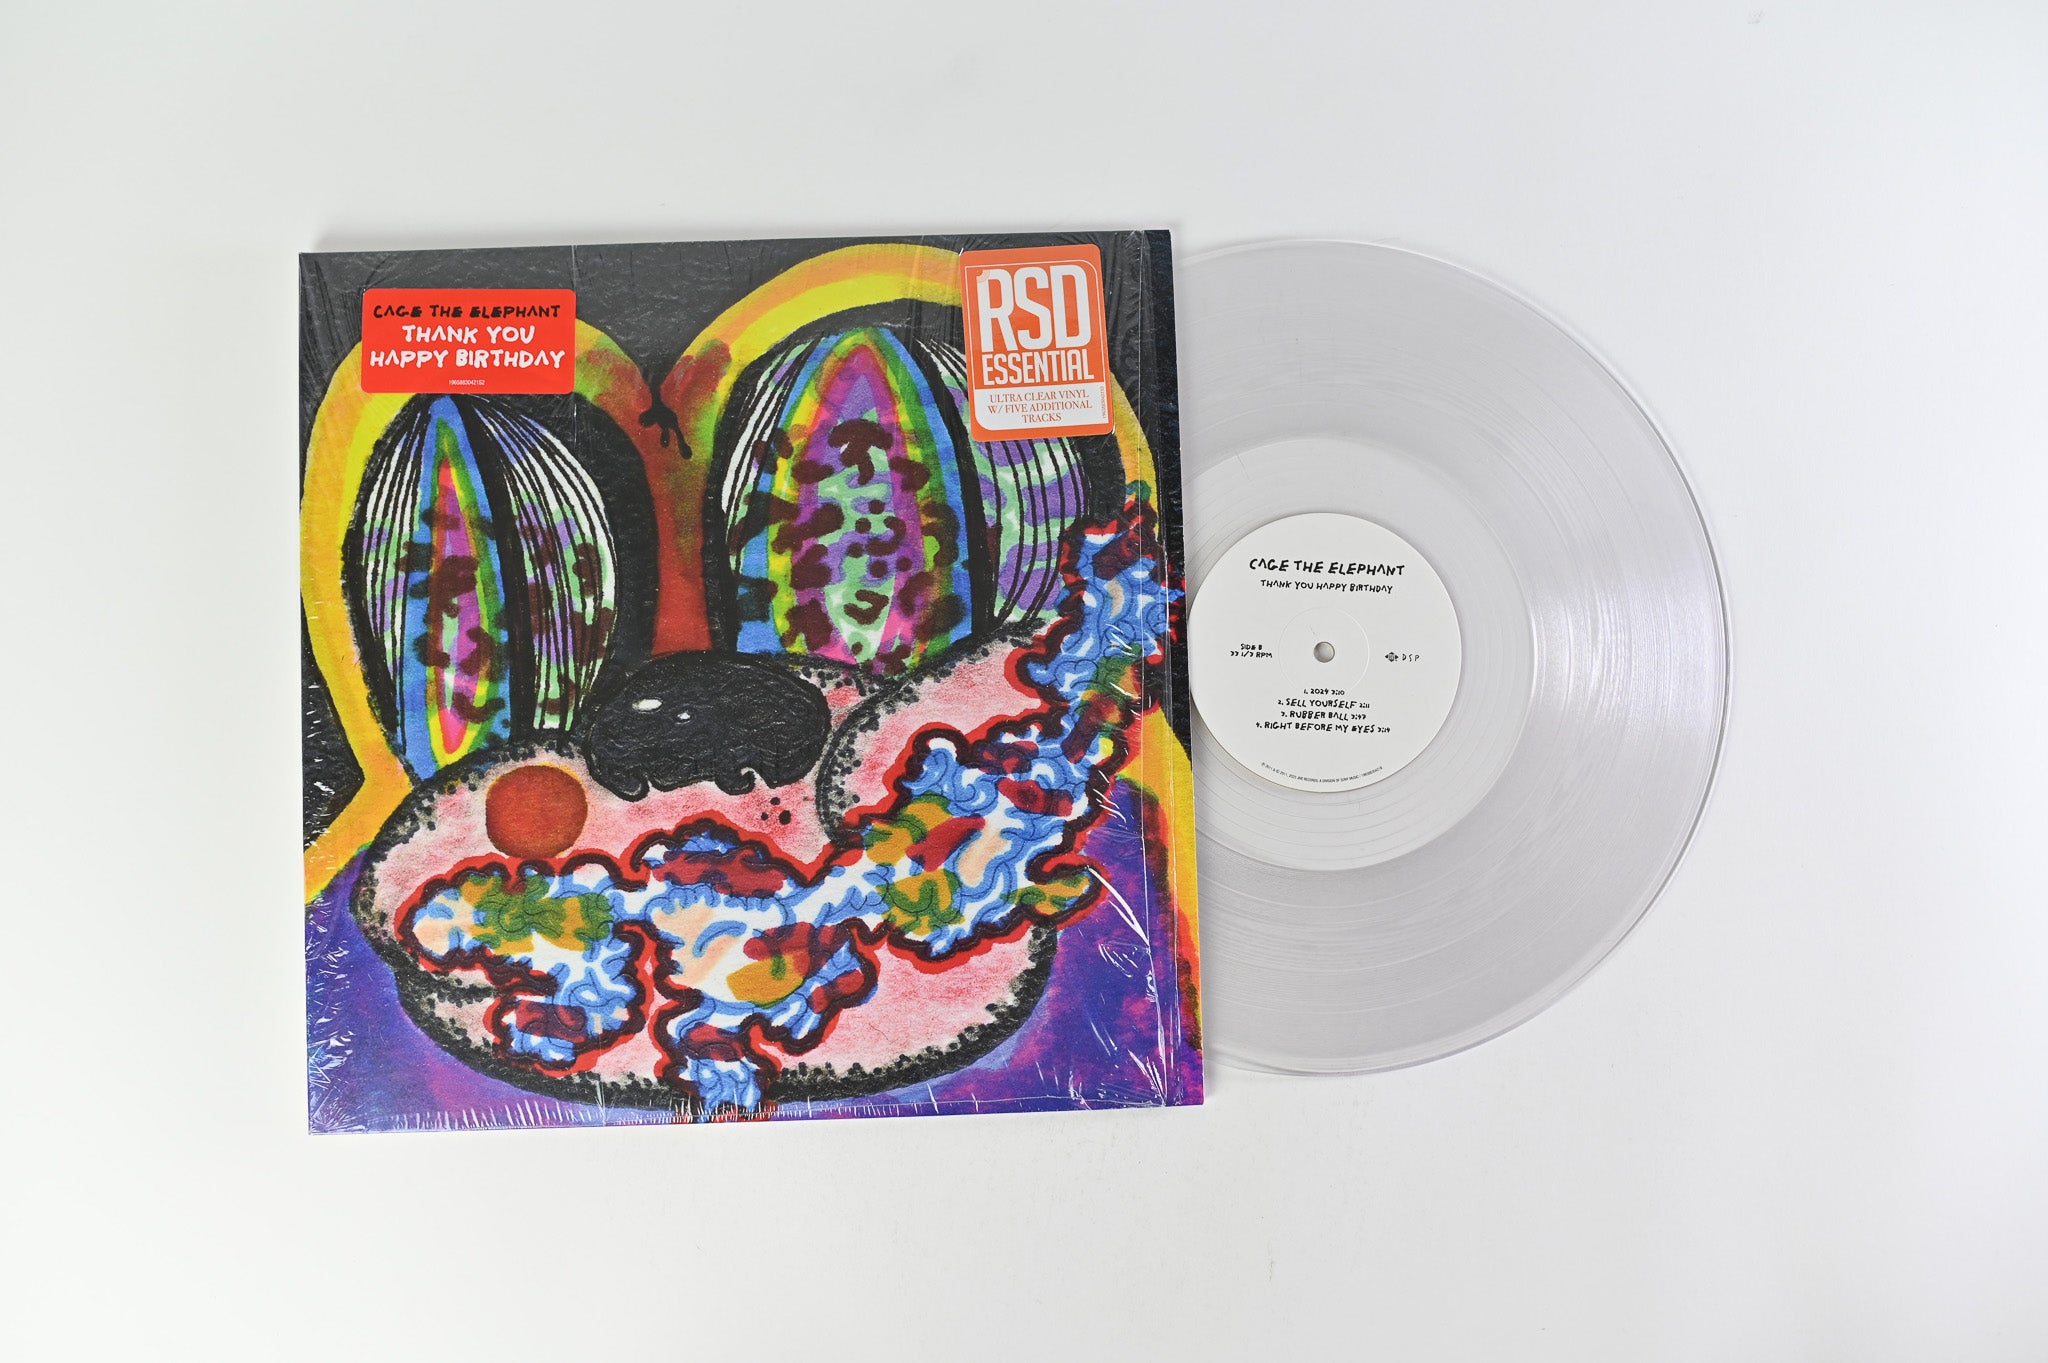 Cage The Elephant - Thank You Happy Birthday on Jive Clear Vinyl